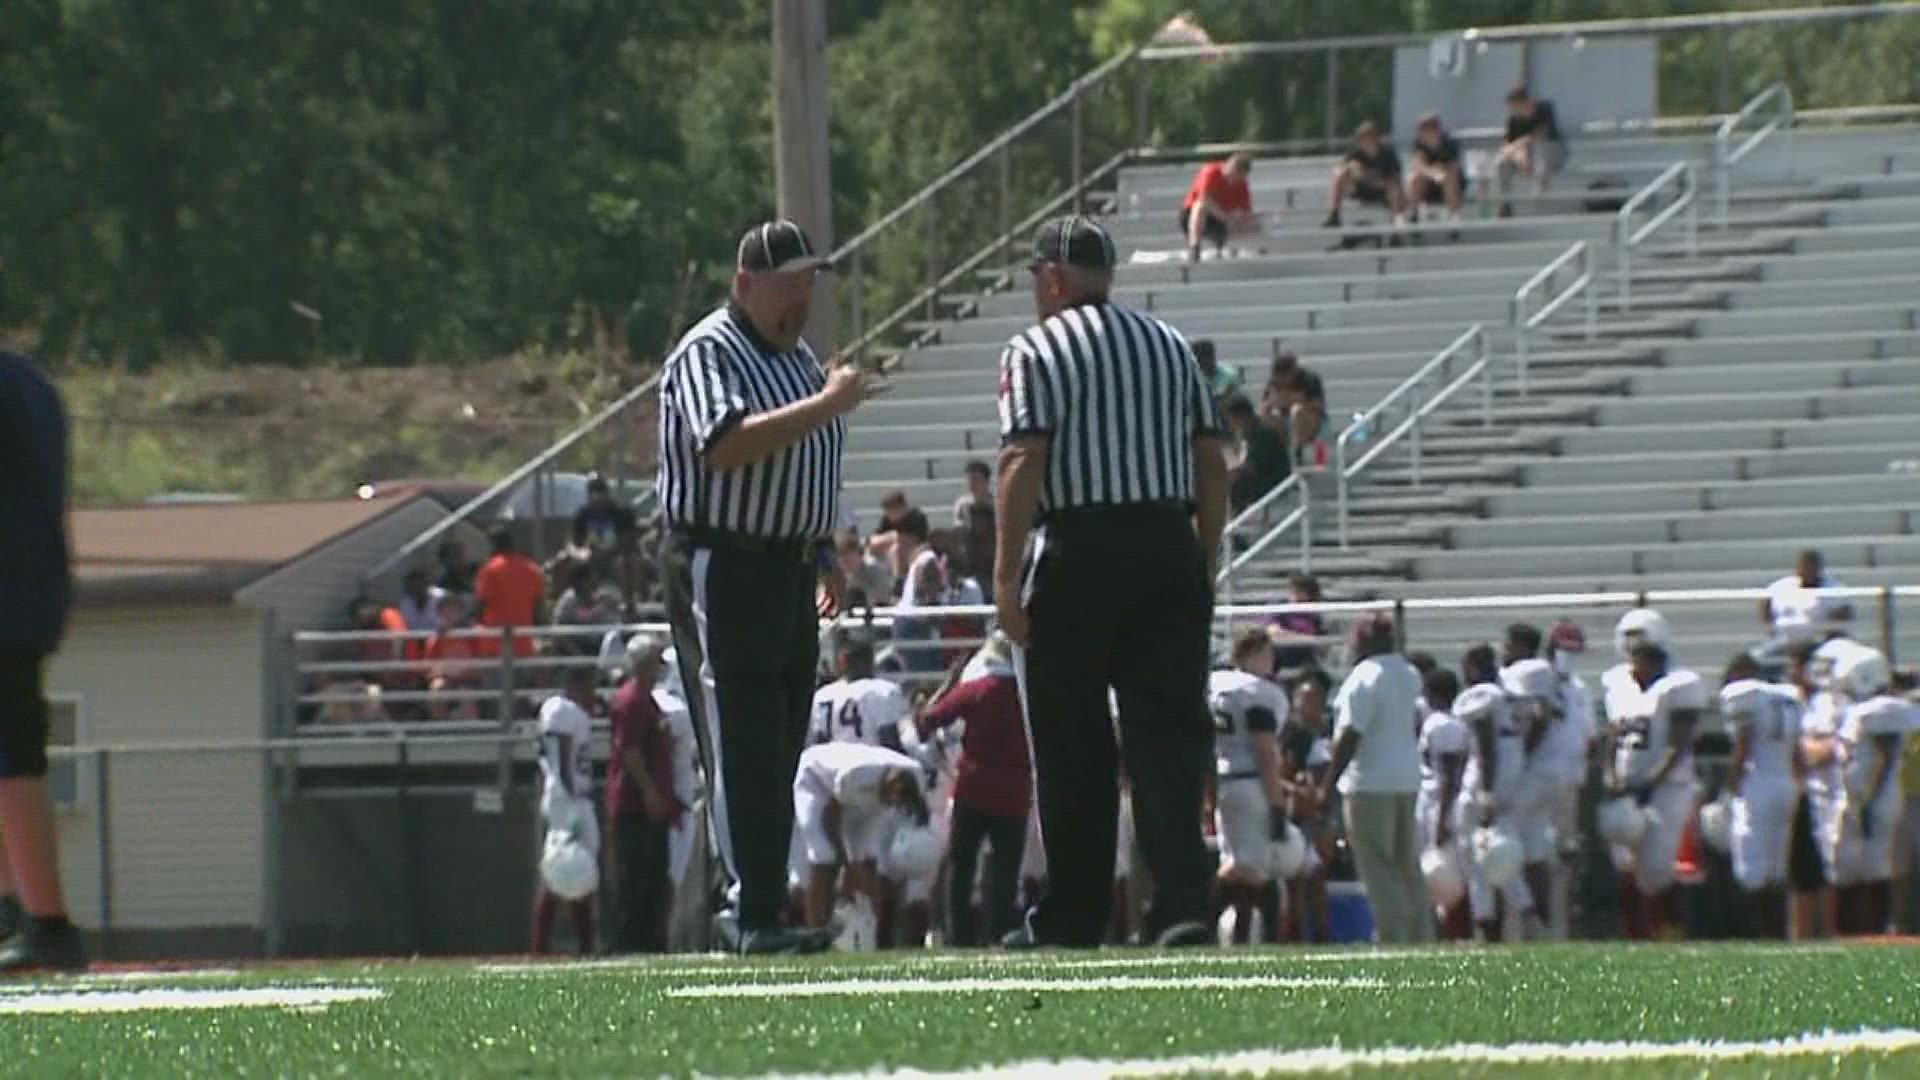 The shortage of referees is becoming a "crisis" according to longtime official Mike Botts. Hear why the need for officials is more important than ever before.